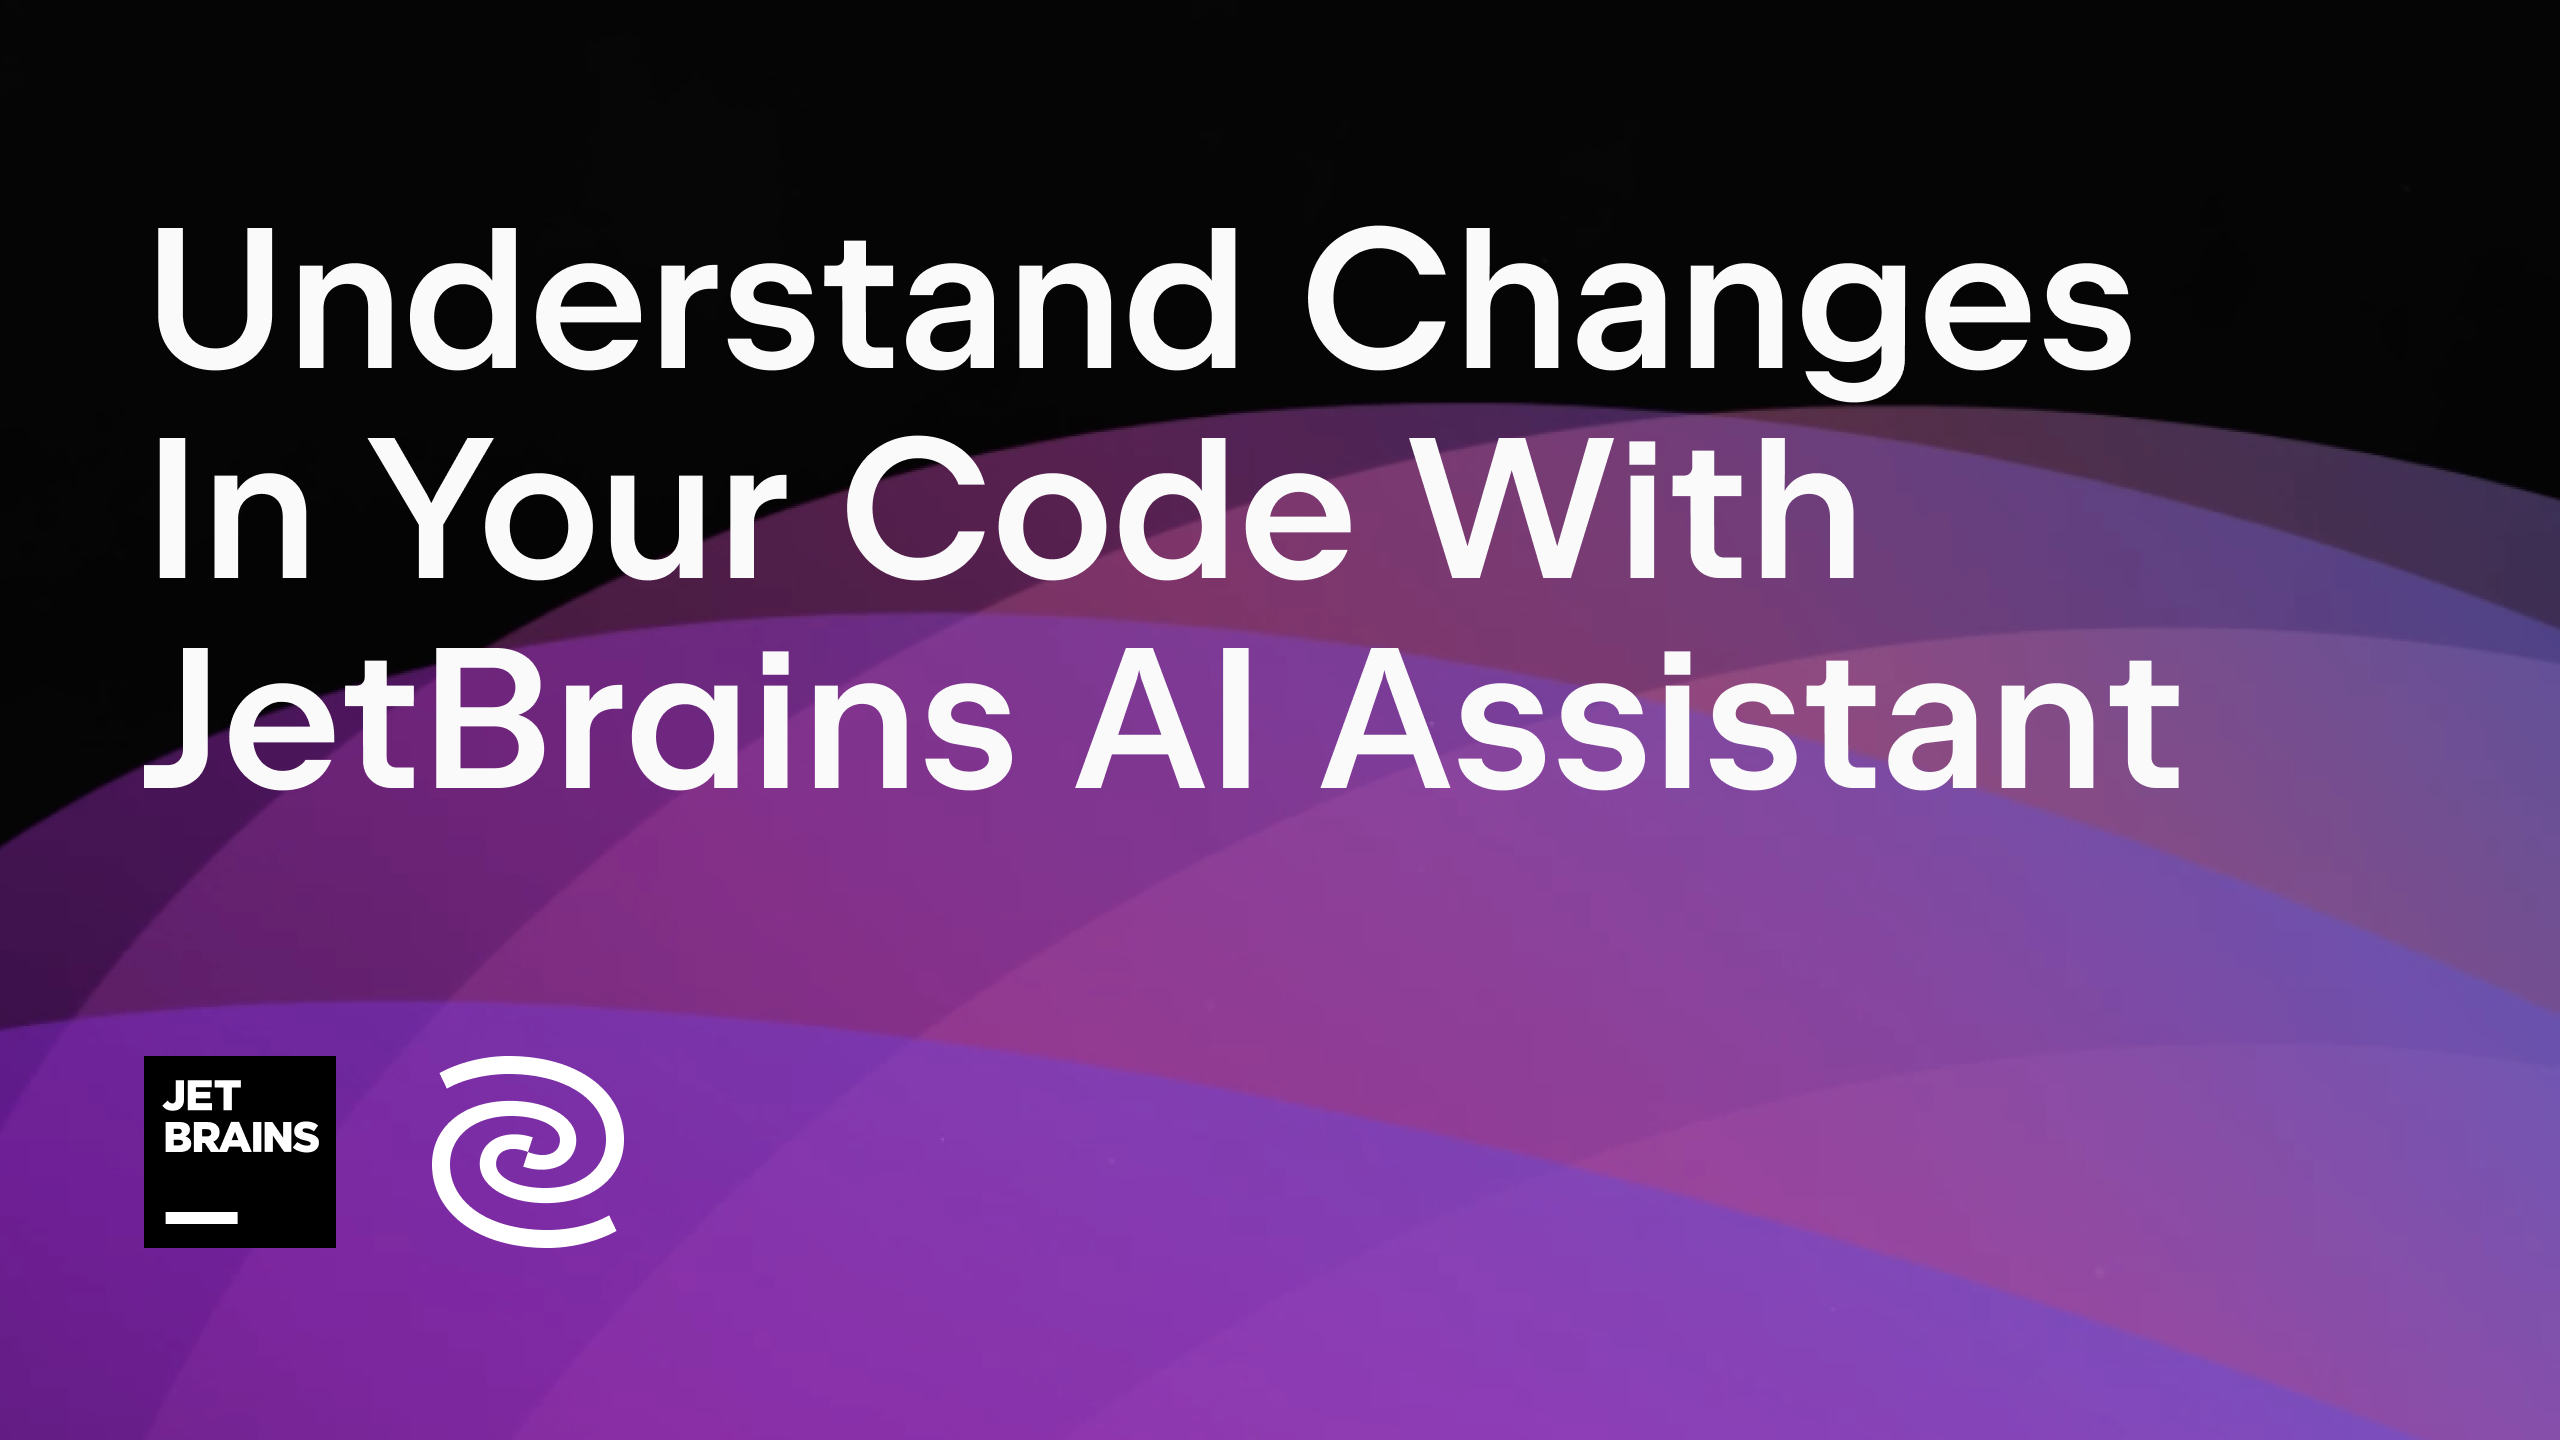 Understand Changes in your code with JetBrains AI Assistant